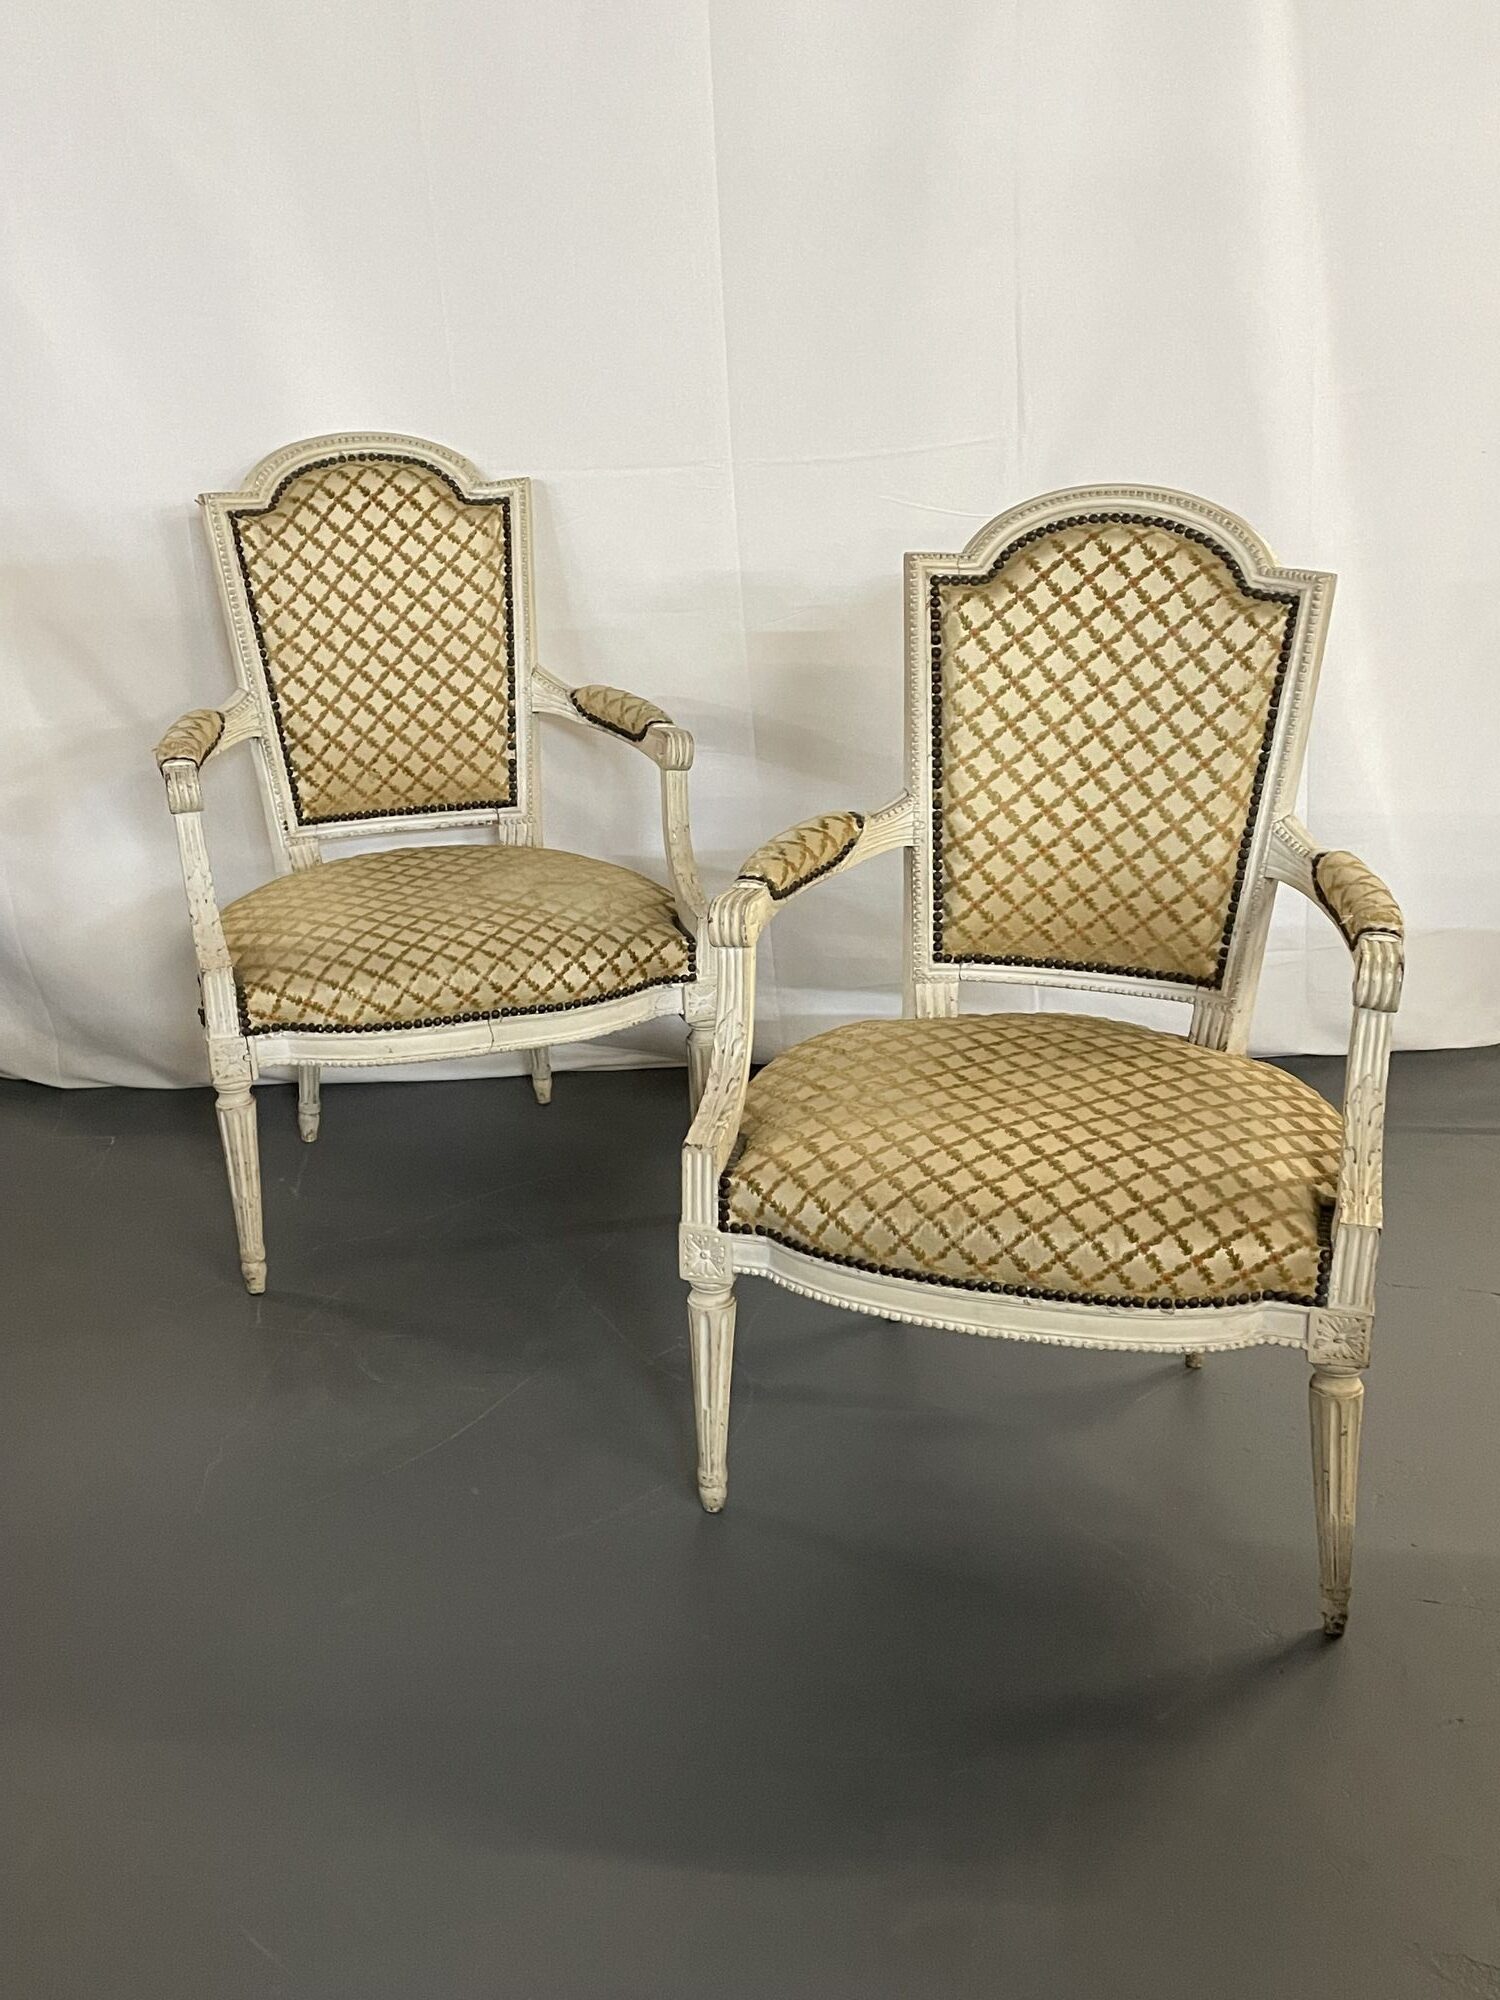 Pr. Of Maison Jansen Arm Chairs Signed. Louis XV Style Late 19c